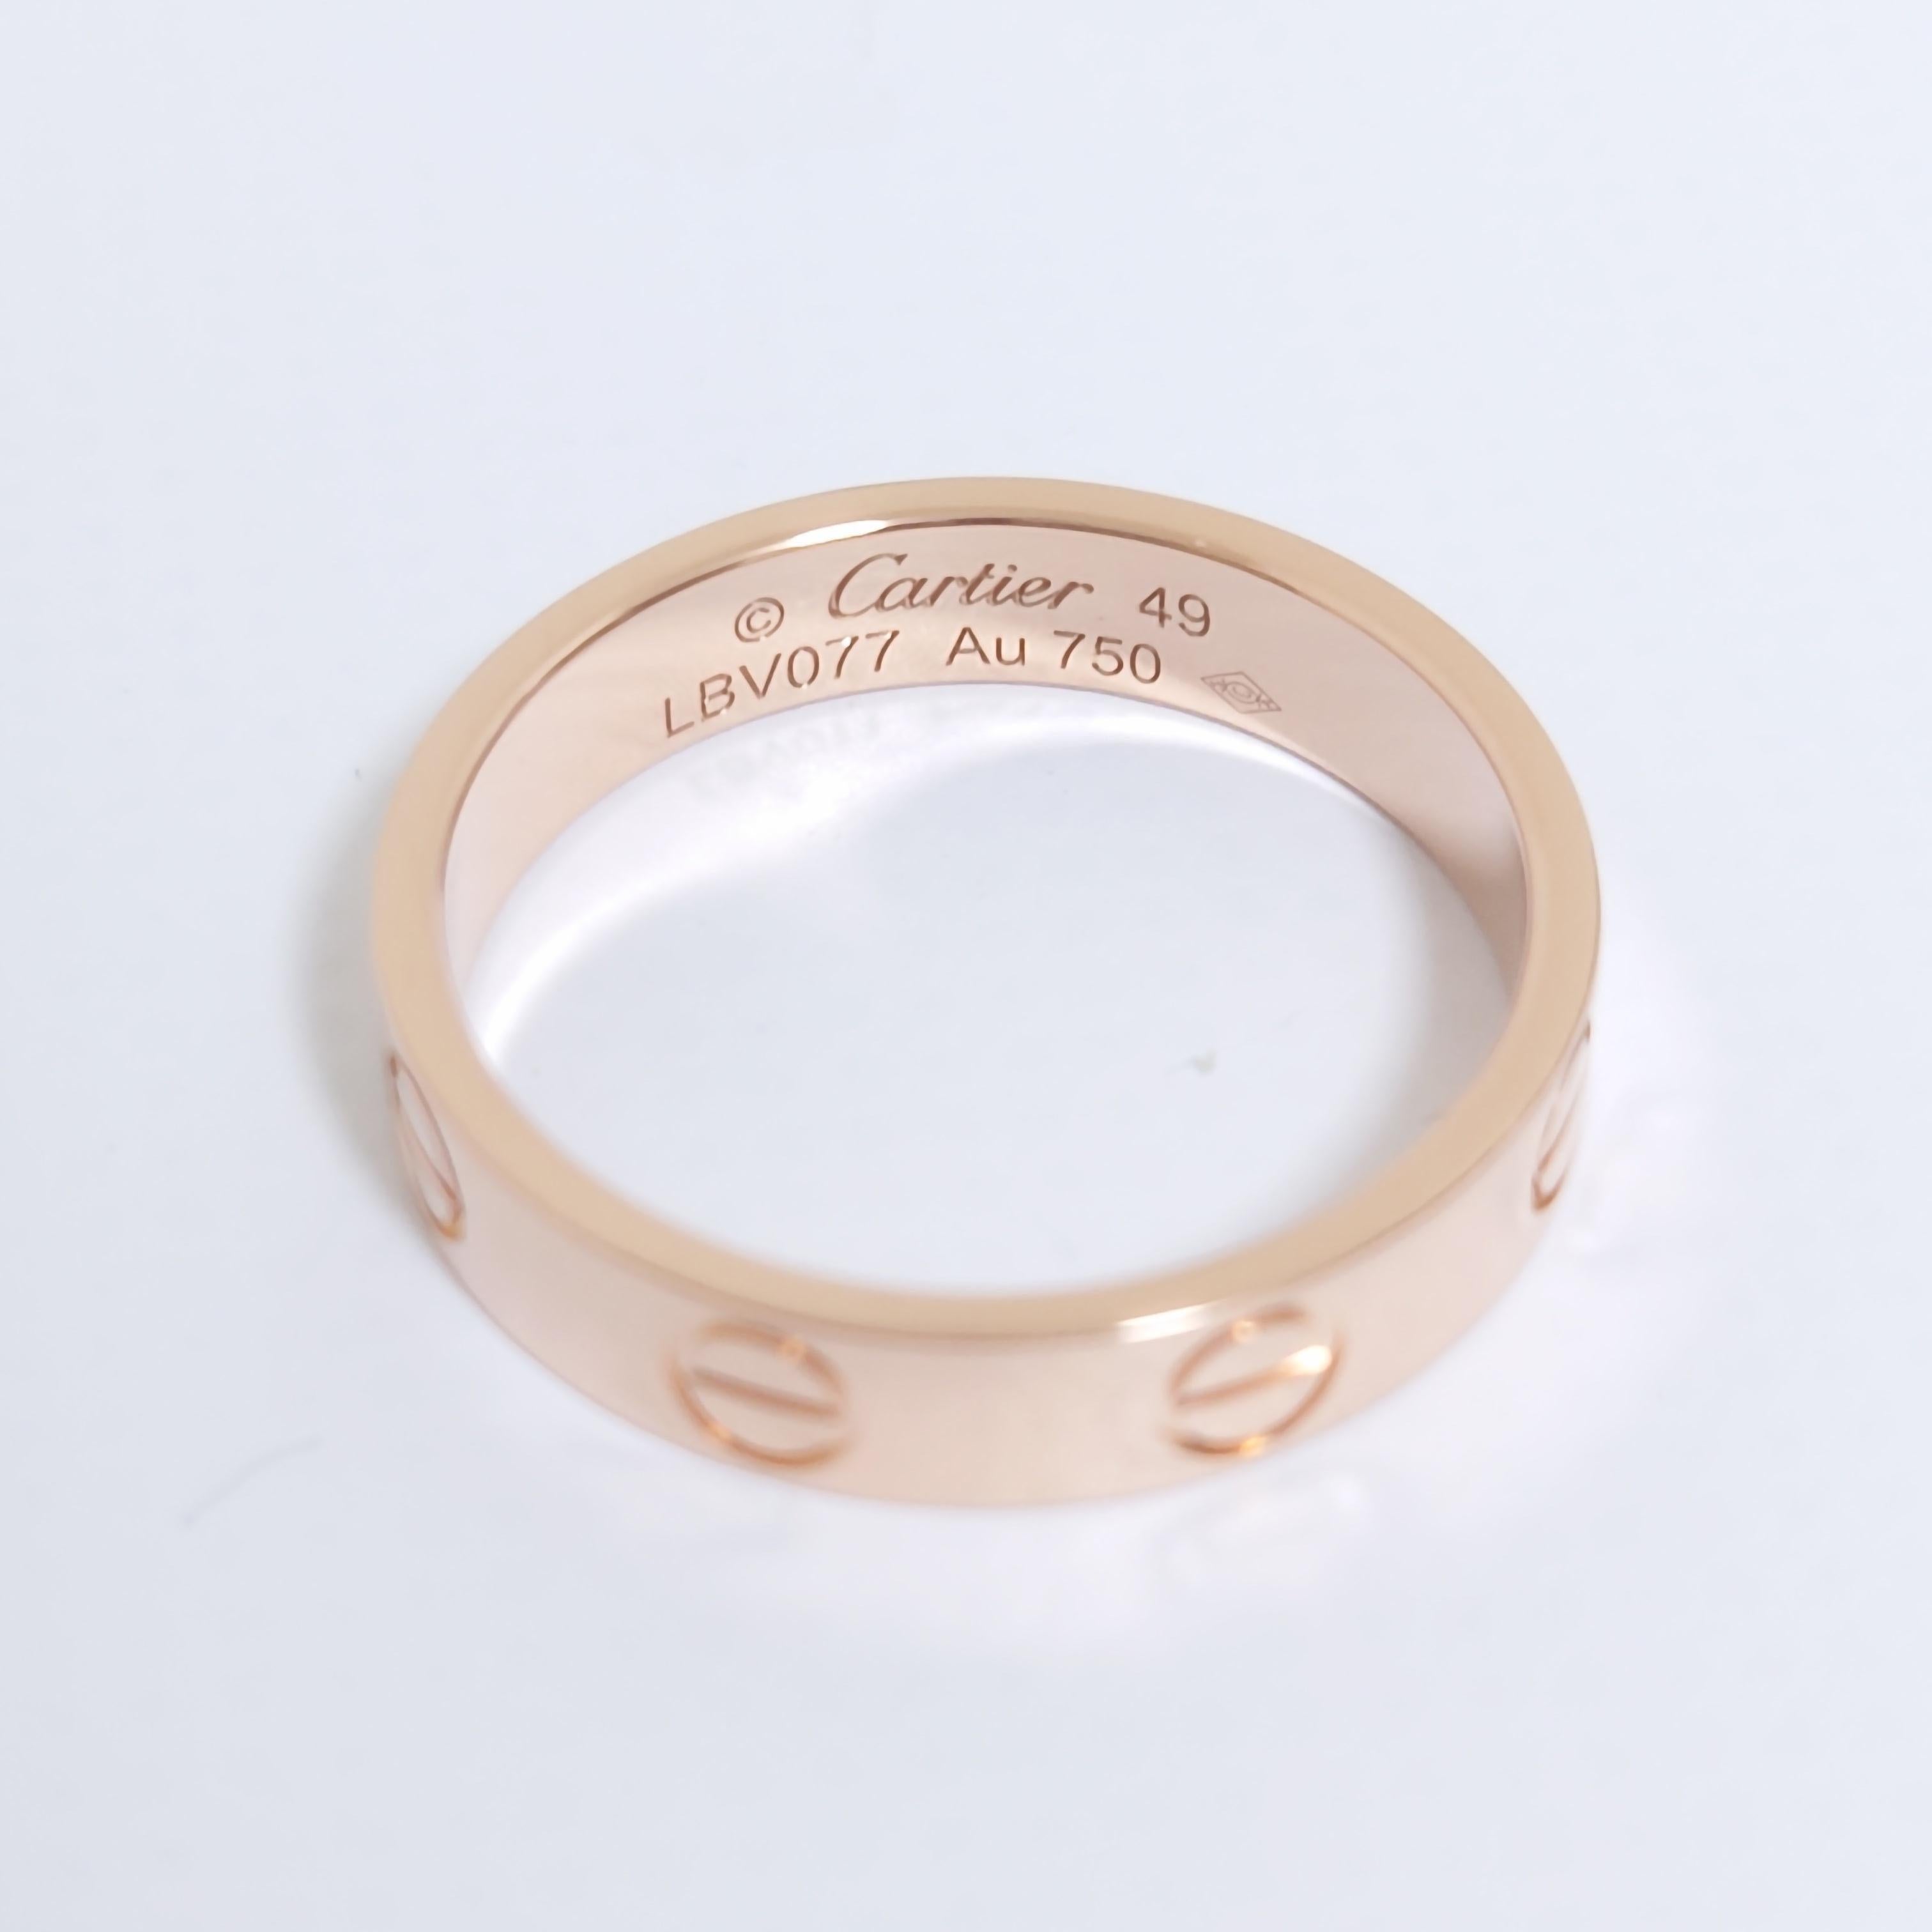 Cartier Rose Gold Love Wedding Band Ring 2